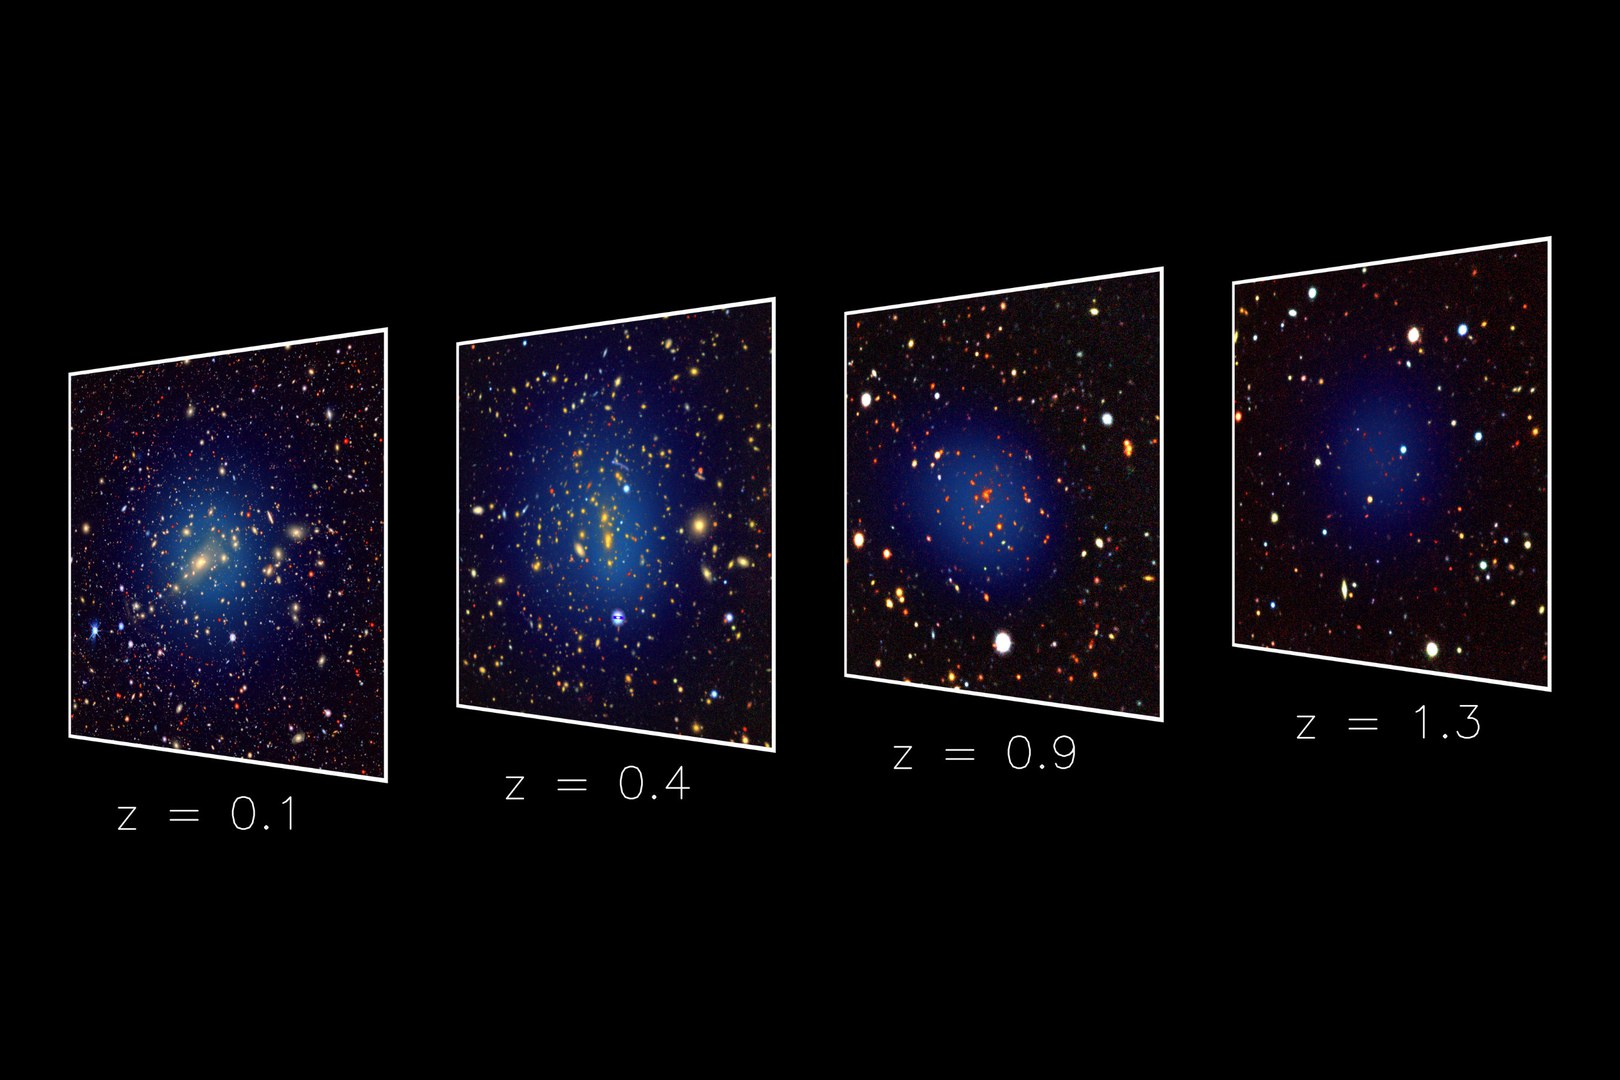 Optical images showing galaxies in the direction of four galaxy clusters at different distances. The X-ray emission of hot gas in the clusters is shown in blue.